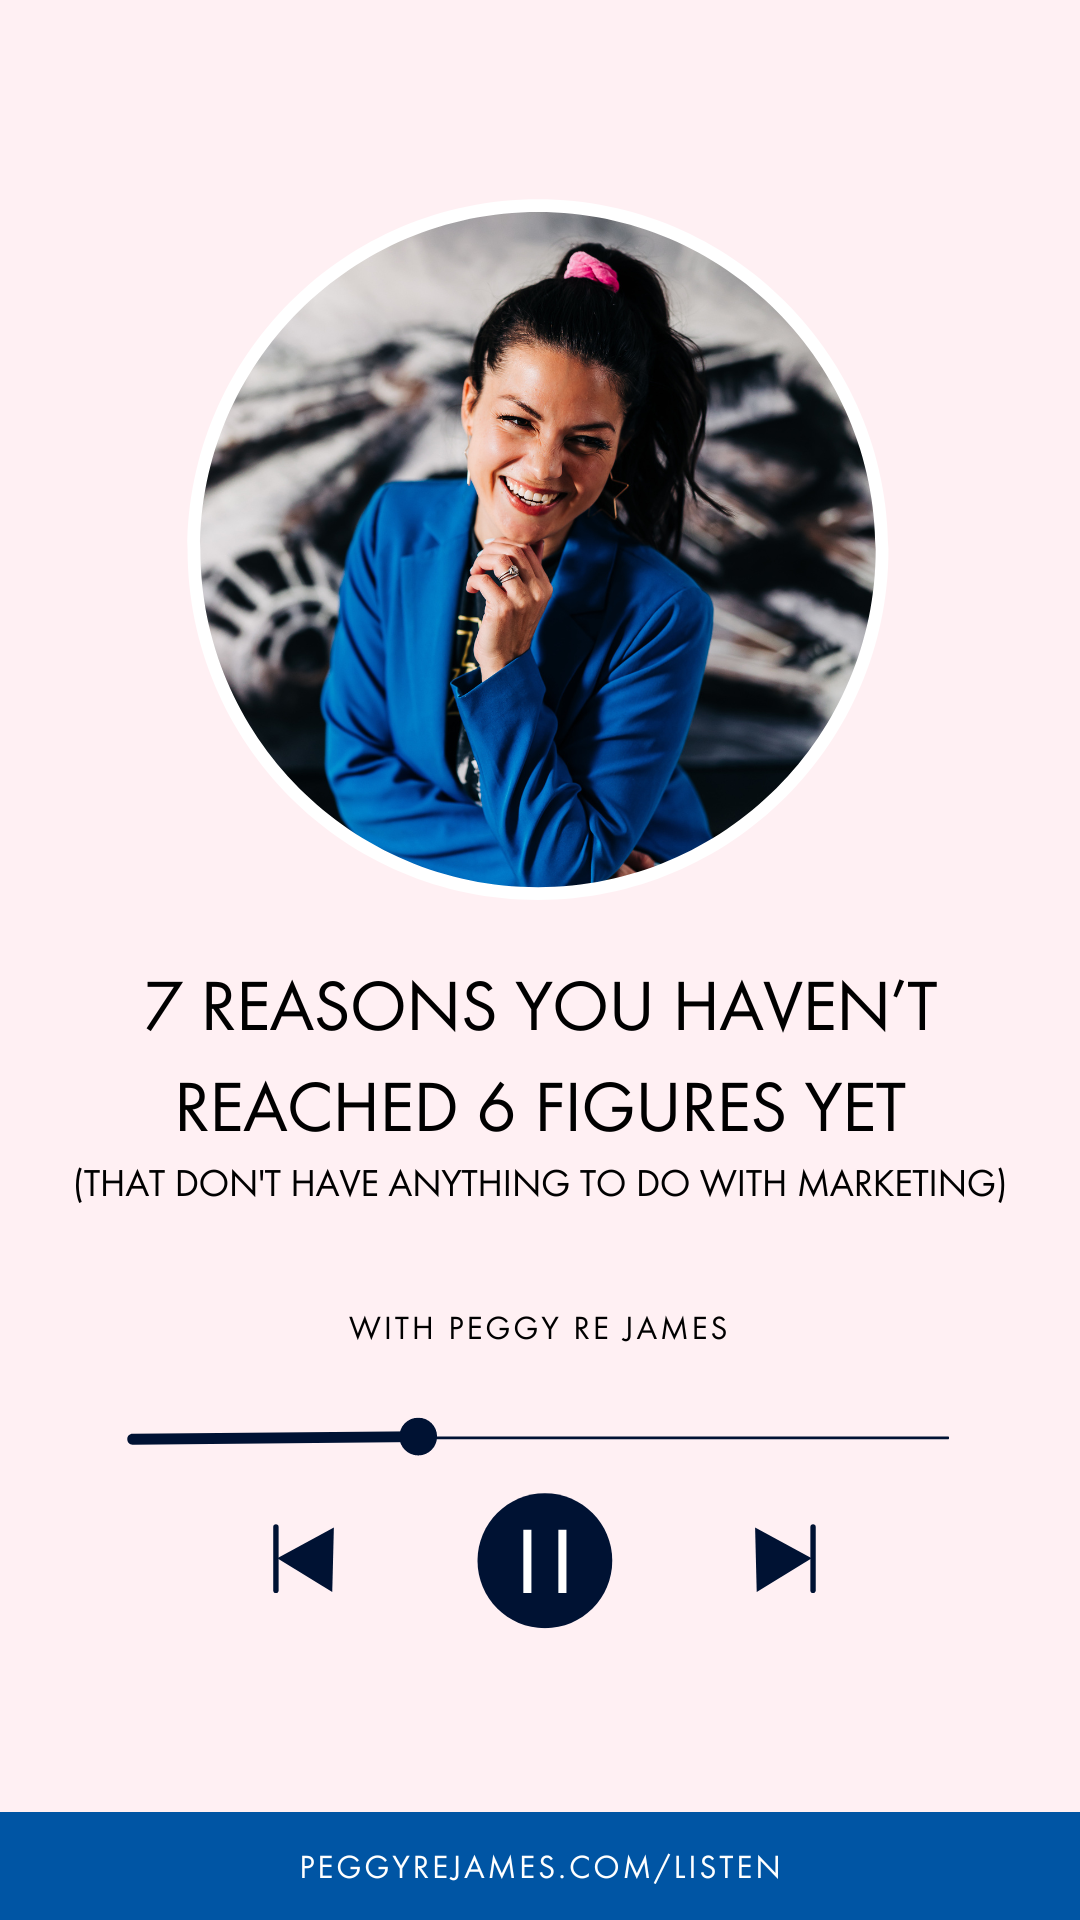 7 reasons you haven’t reached 6 figures yet (that don't have anything to do with marketing)